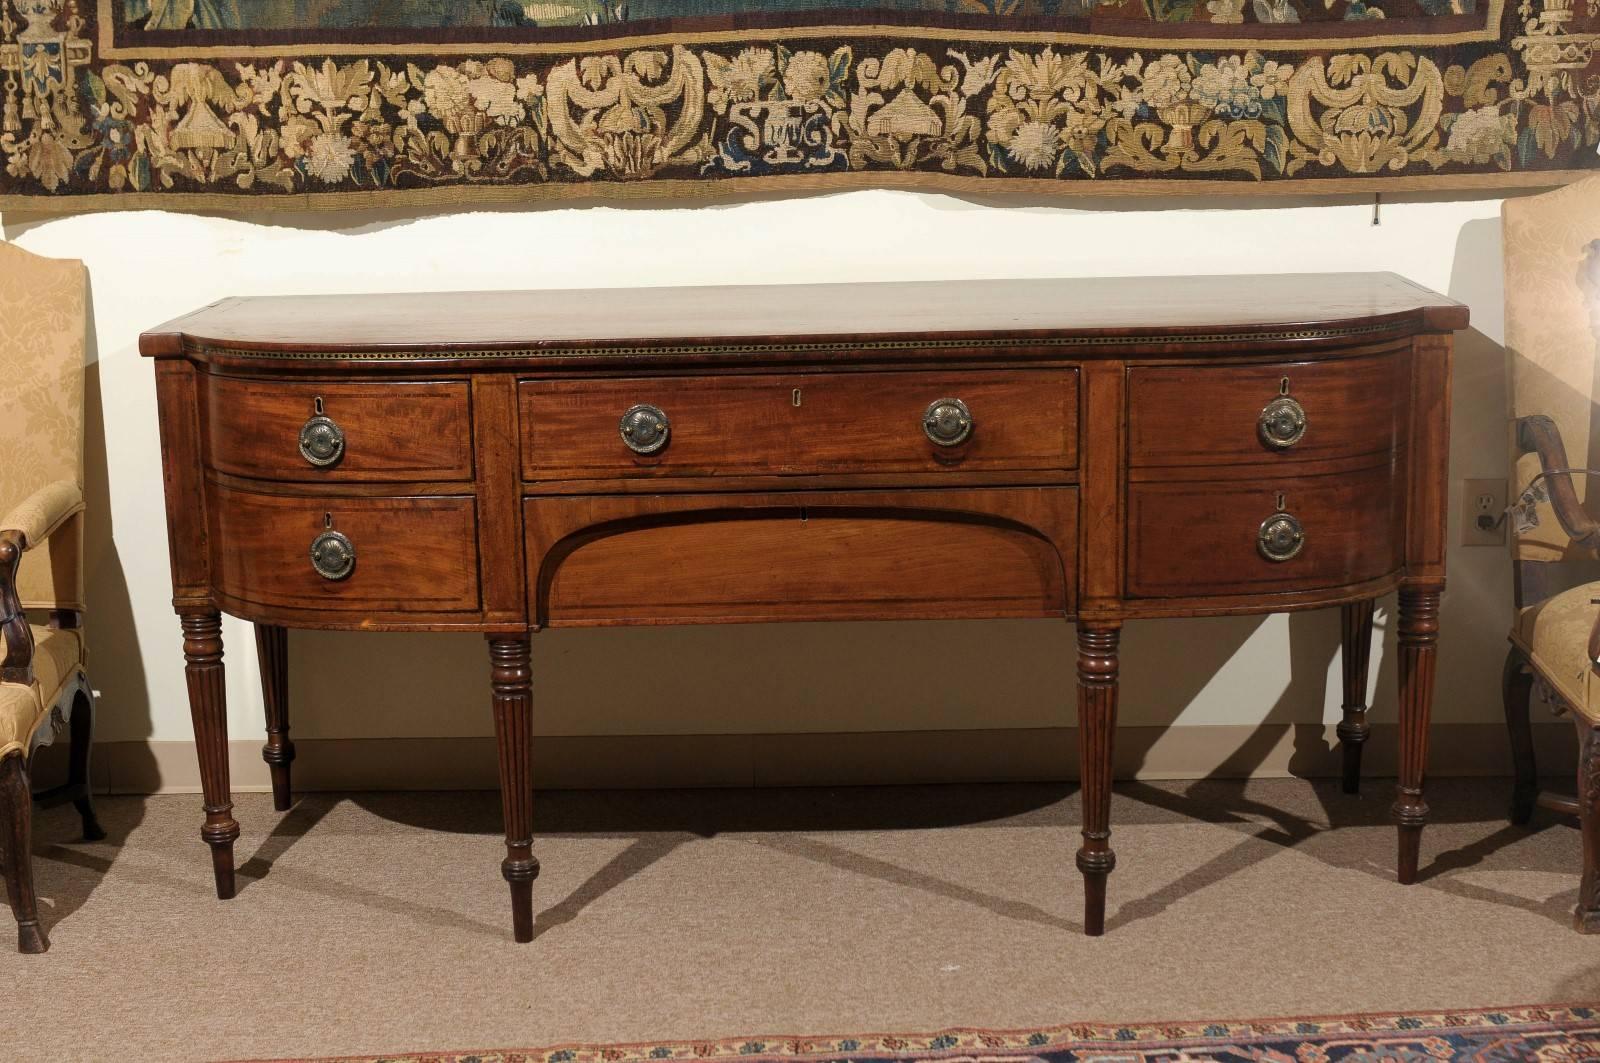 An early 19th century English bow-front Regency sideboard in mahogany with brass inlay and turned reeded legs. 

 